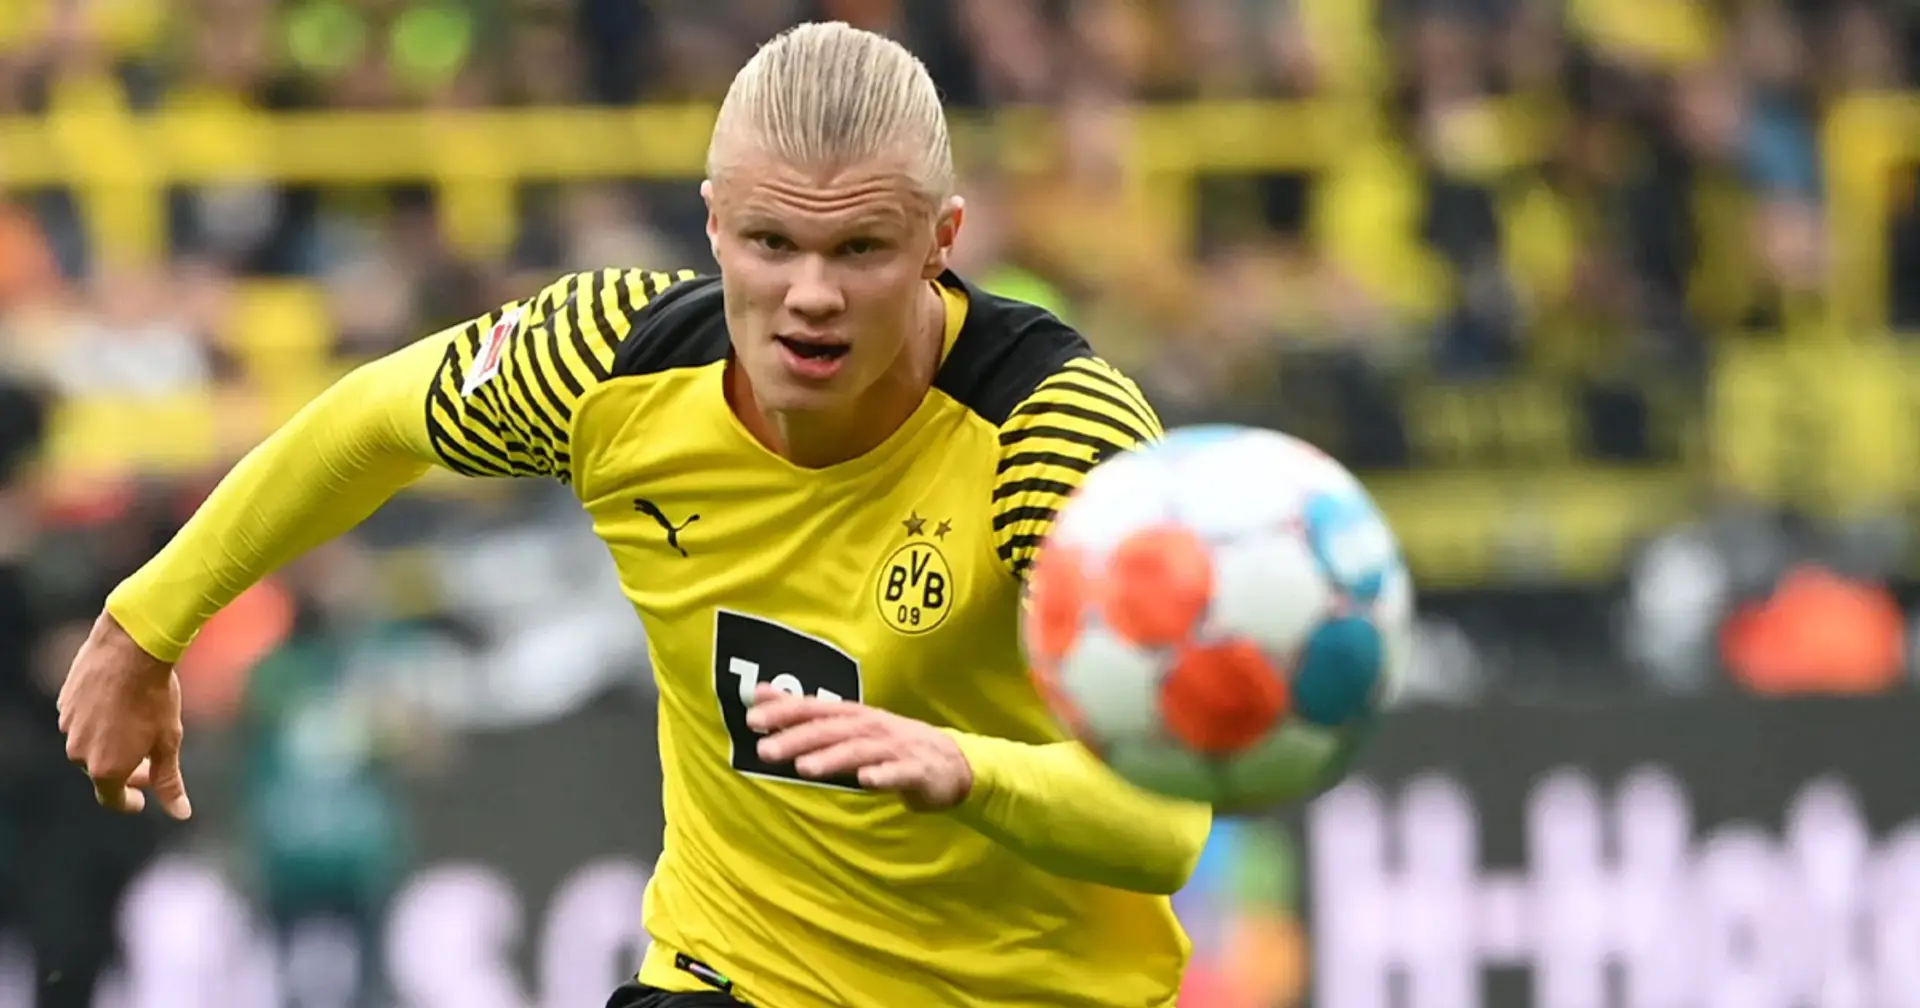 Borussia Dortmund prepared to double Erling Haaland's salary to keep him for just one extra year